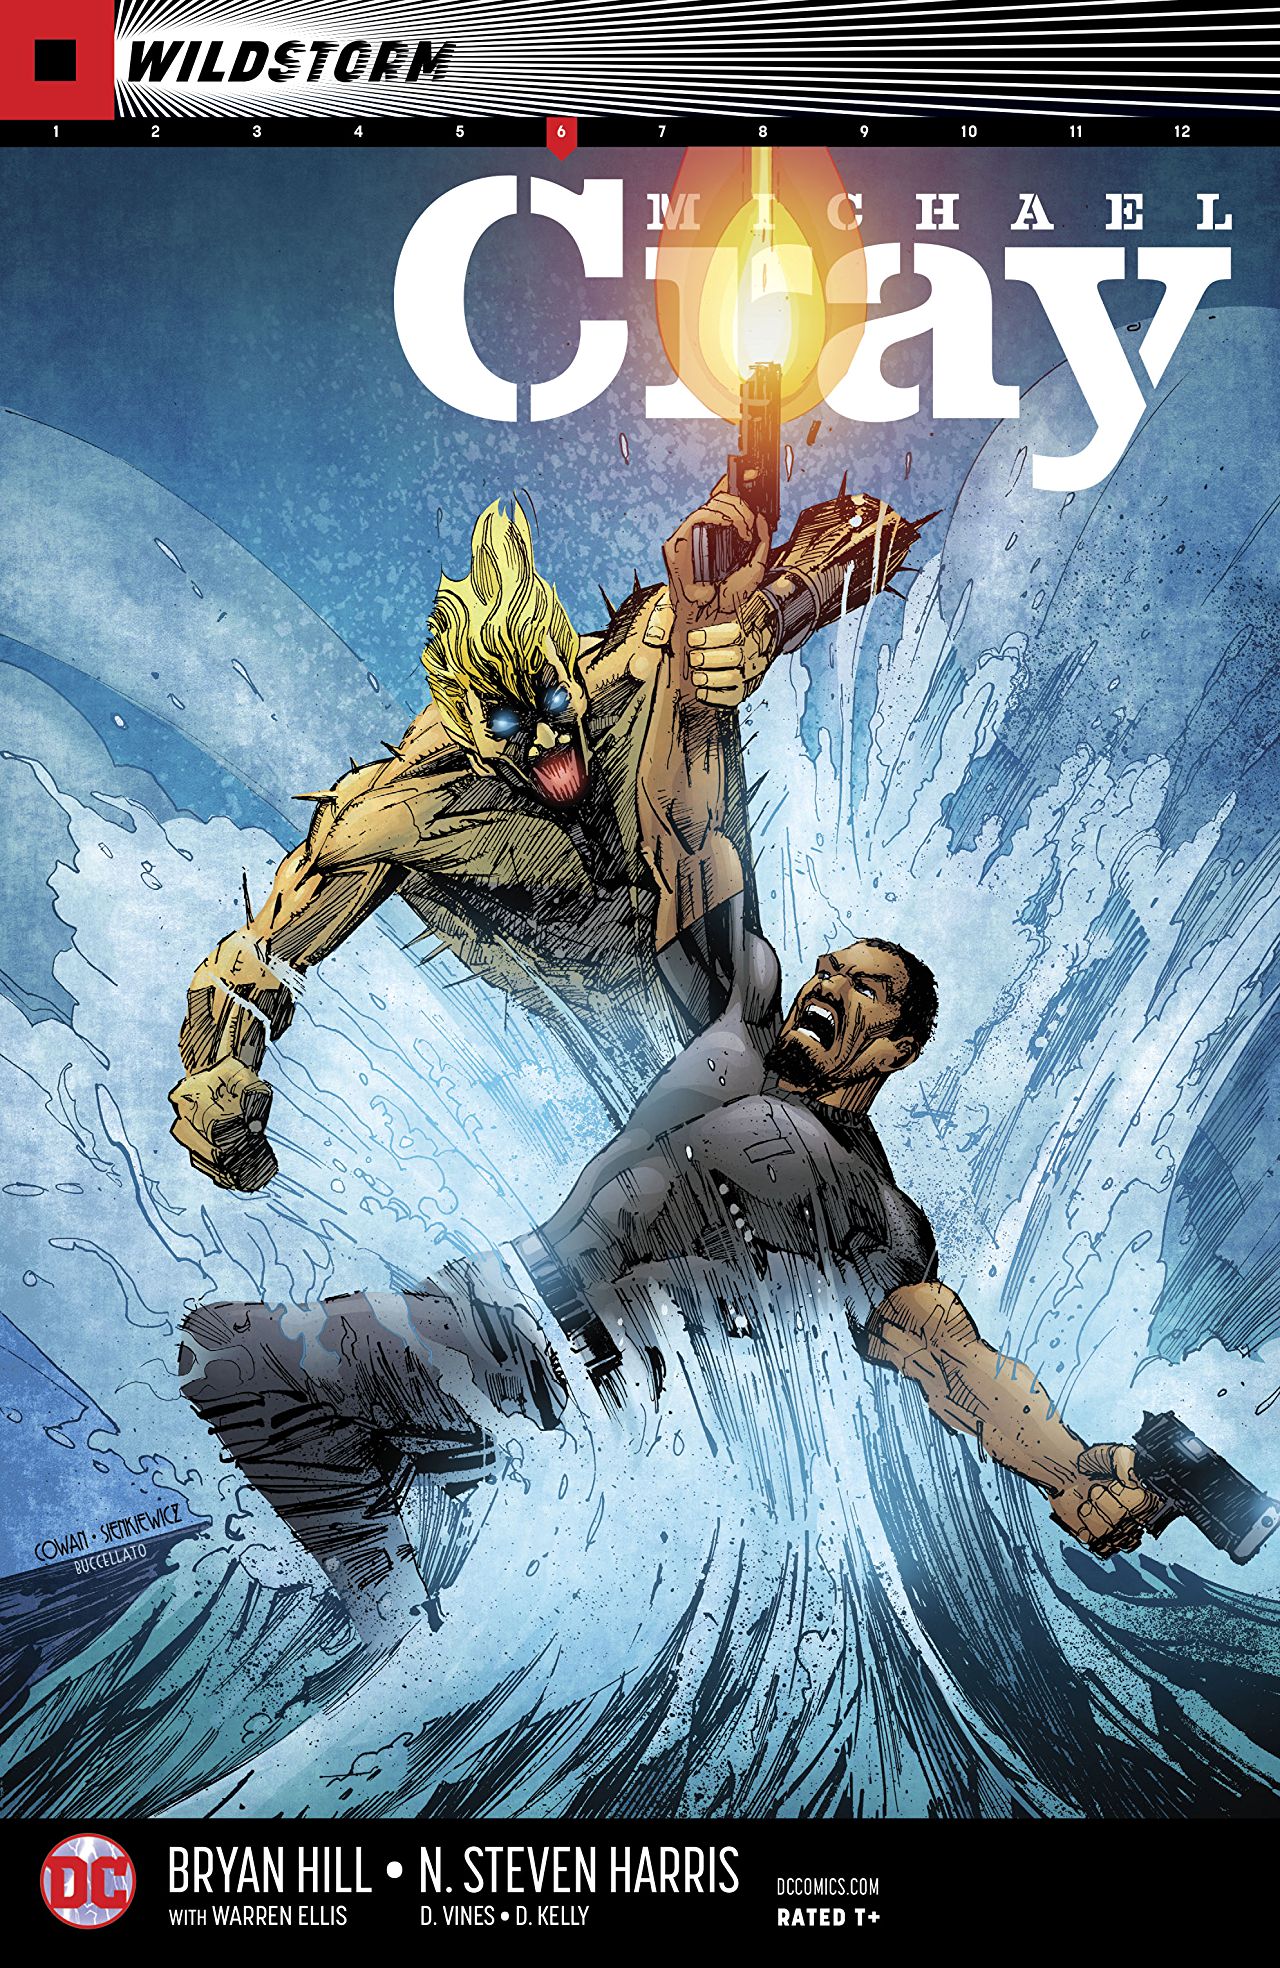 The Wild Storm: Michael Cray #6 Review